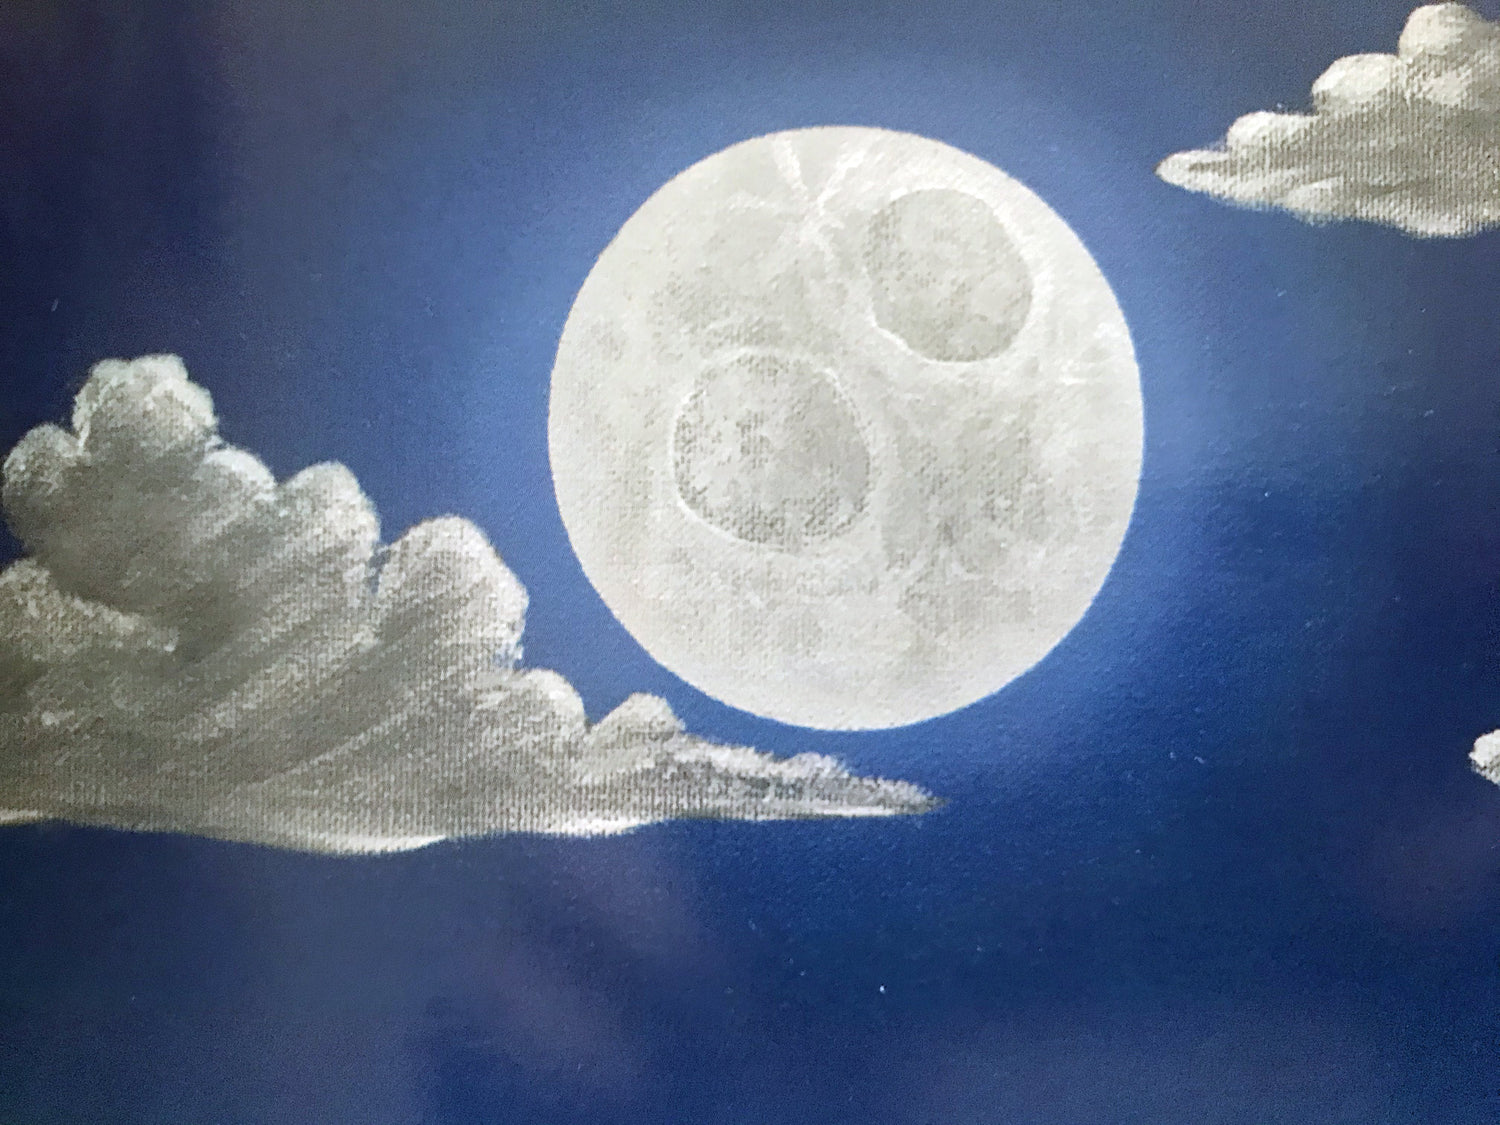 Birds In The Moonlight Dan Mackin Lithograph Print Artist Hand Signed and Numbered